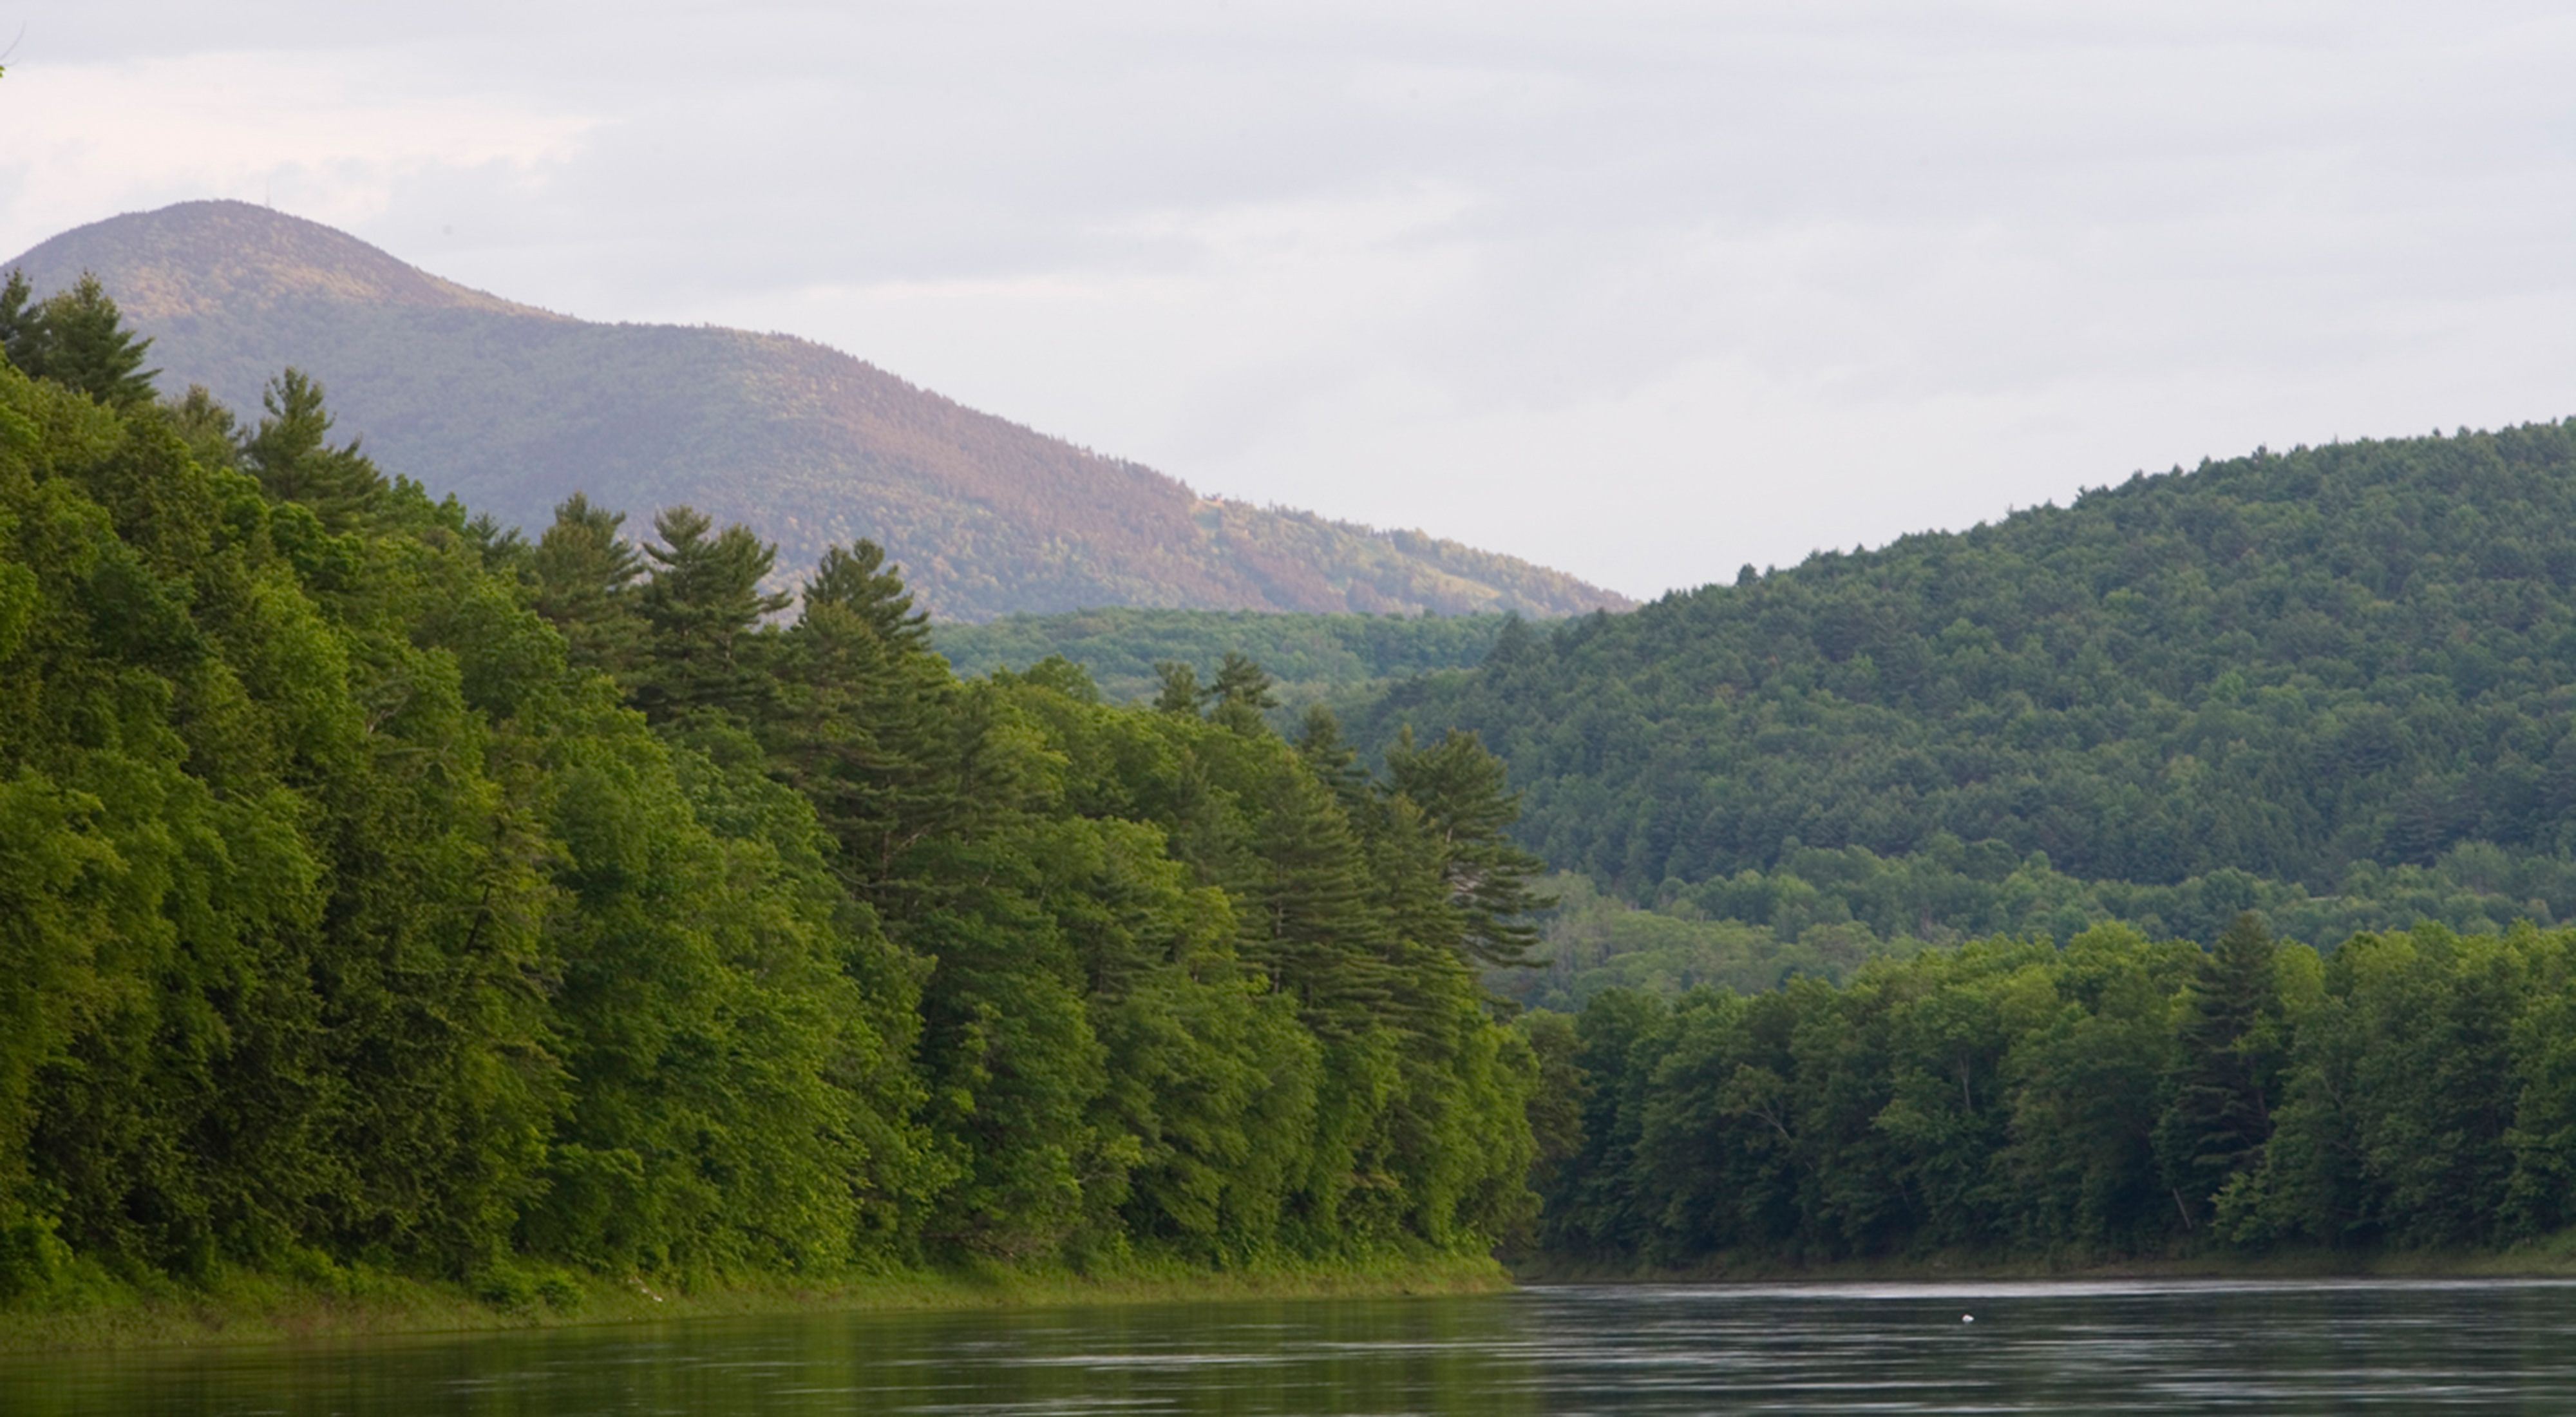 The Connecticut River flows past the Conservancy's Silverweed Seep Preserve in Plainfield, New Hampshire